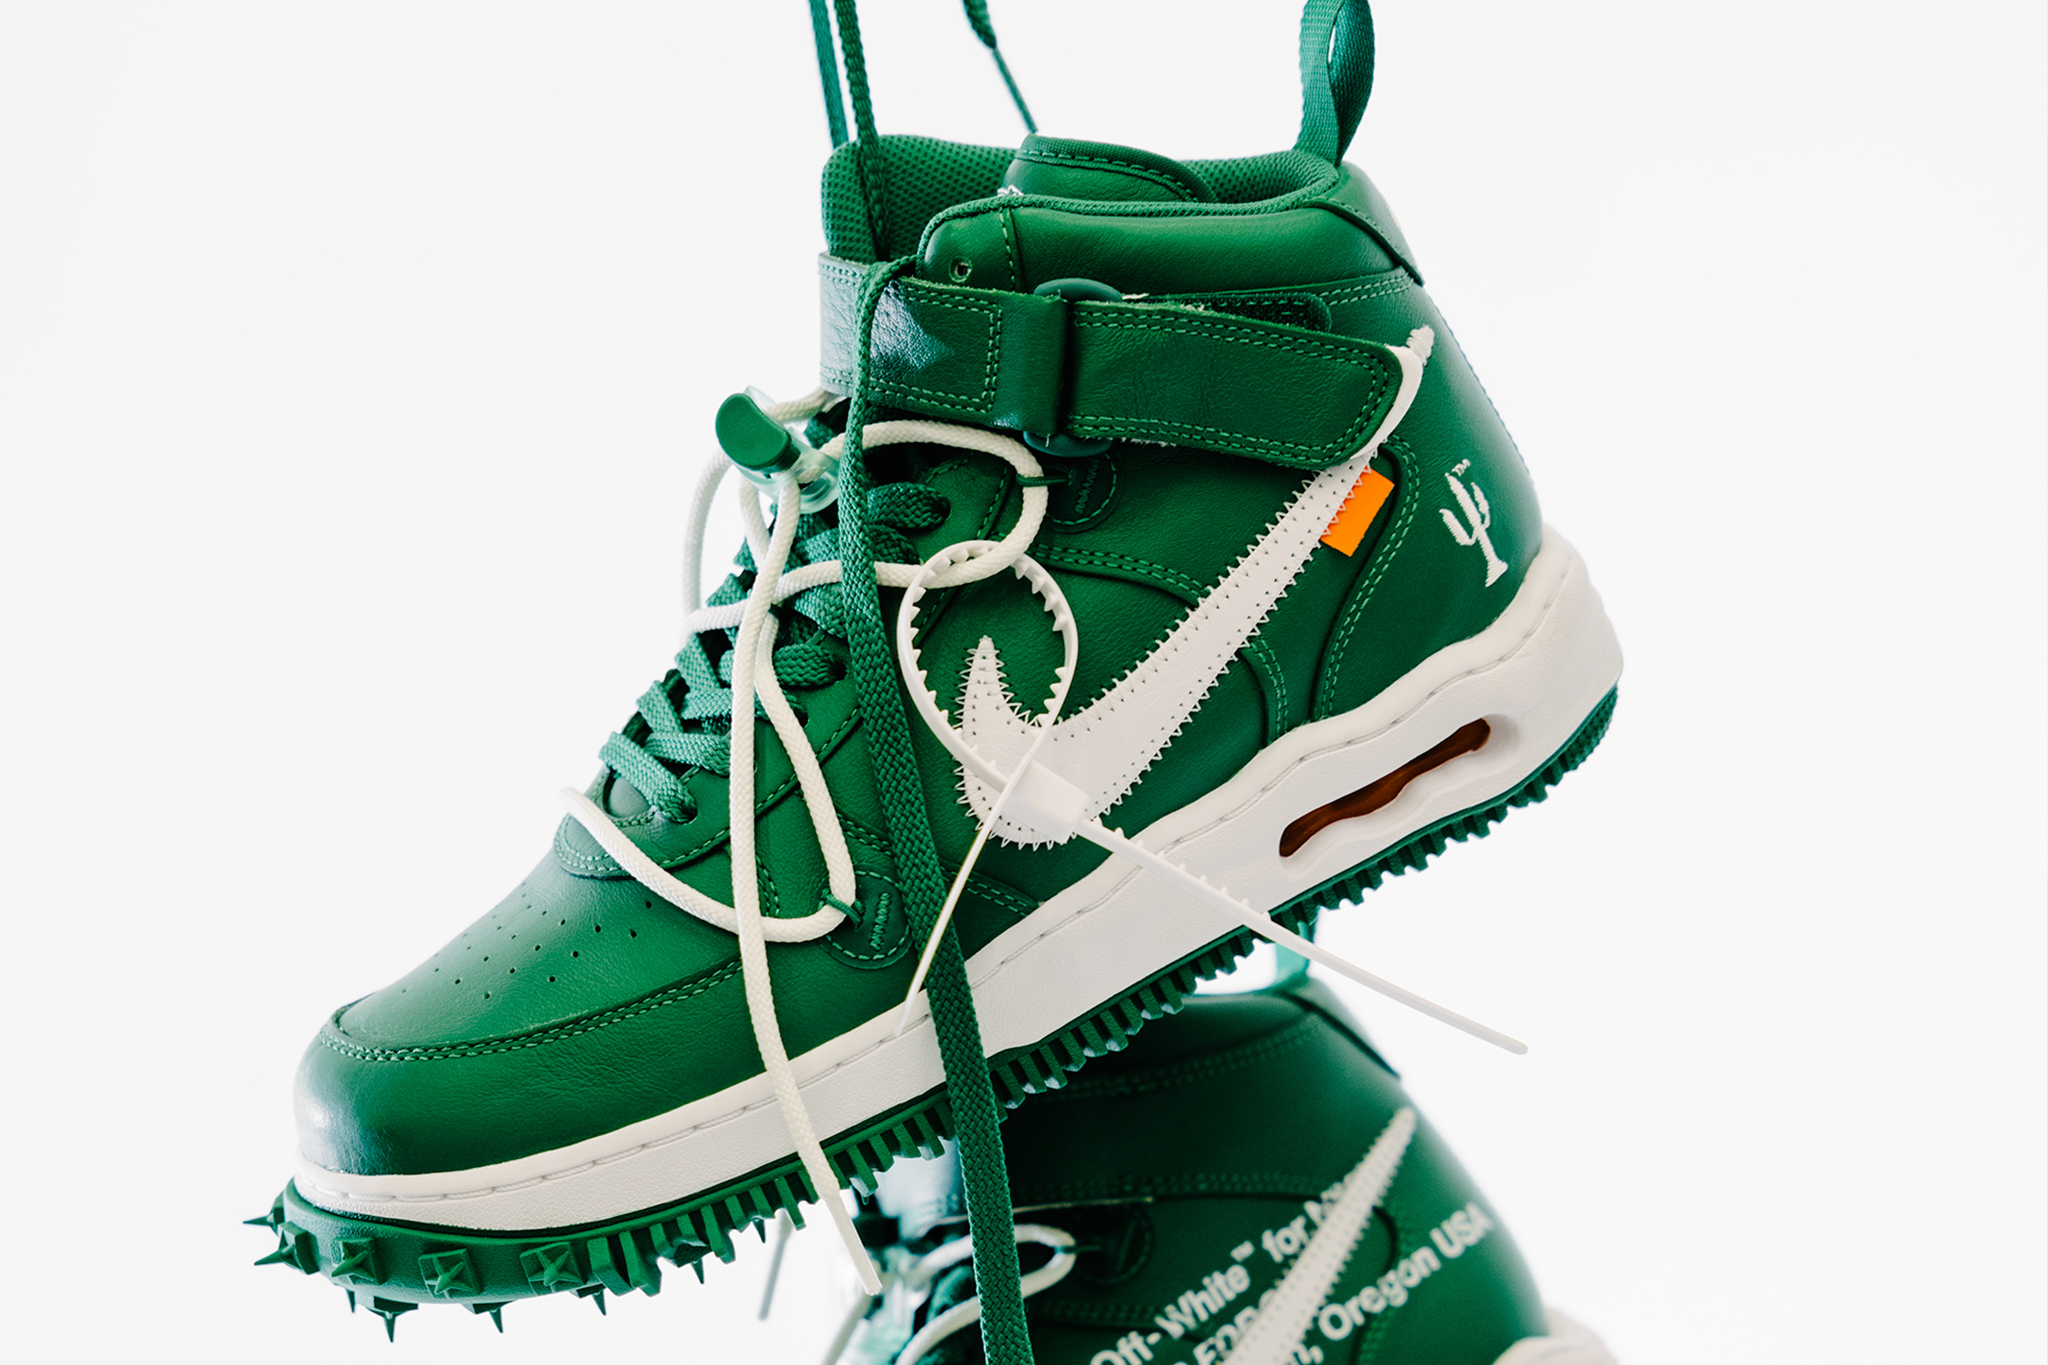 heldig Bare overfyldt Odds Raffle: Off-White x Nike Air Force 1 Mid Leather “Pine Green” | HAVEN